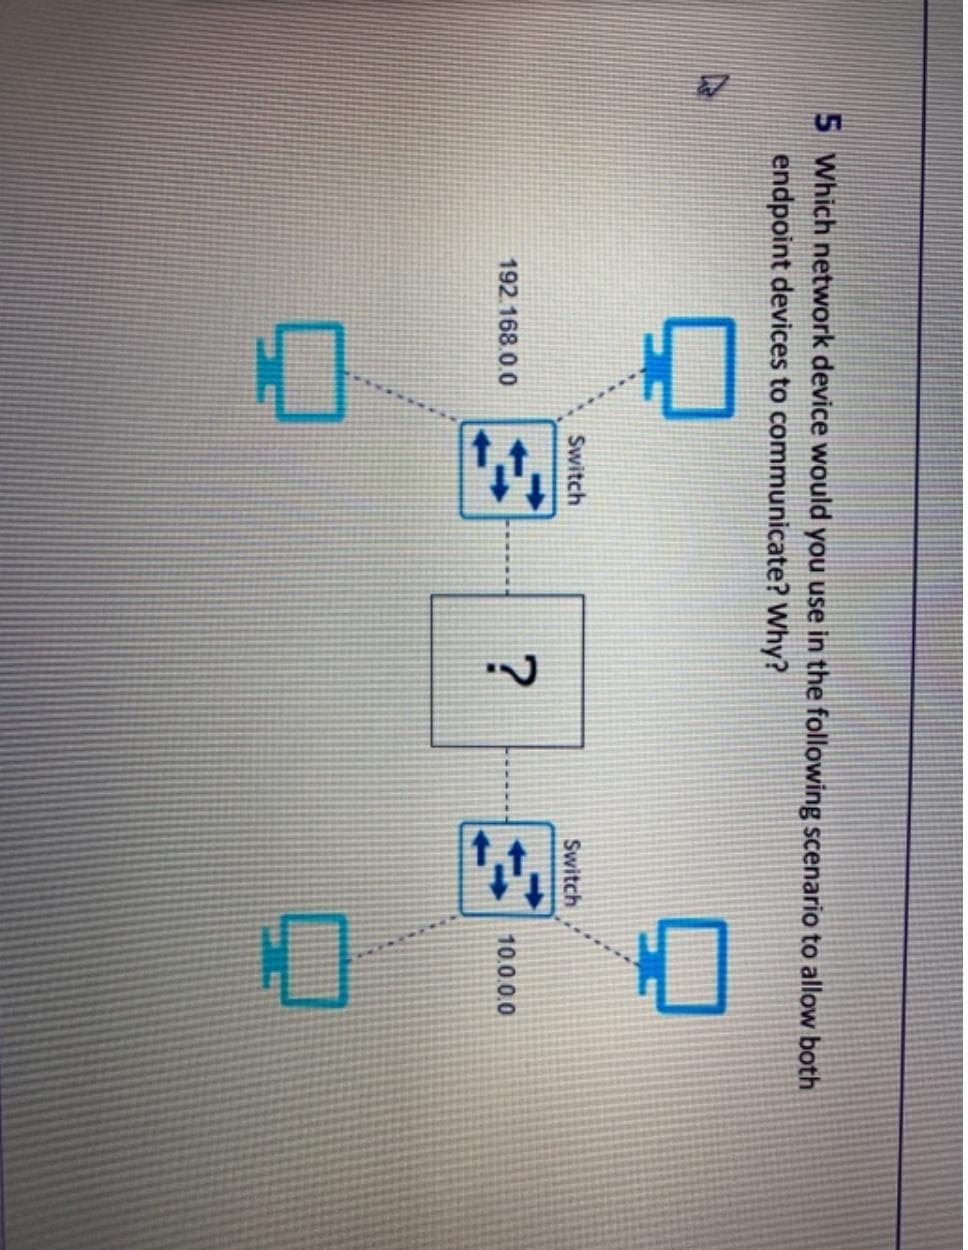 5 Which network device would you use in the following scenario to allow both
endpoint devices to communicate? Why?
Switch
Switch
192.168 0.0
10.0.0.0
